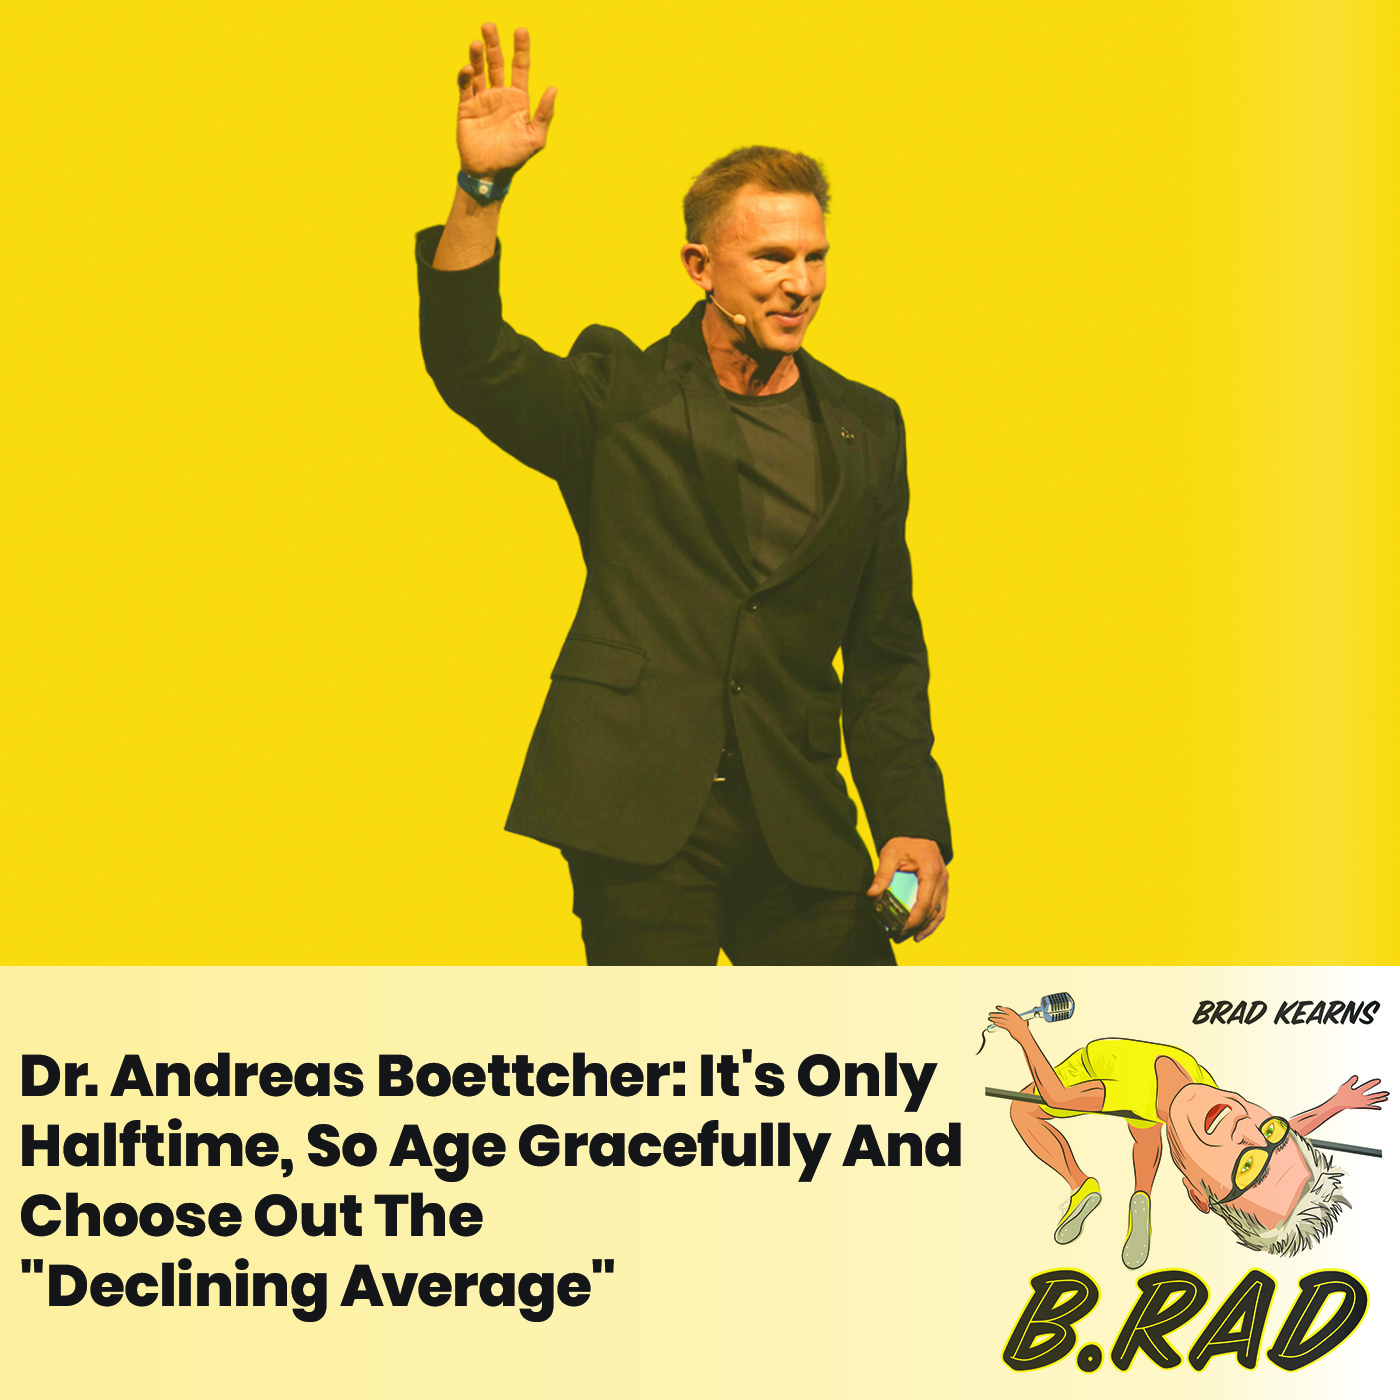 Dr. Andreas Boettcher: It's Only Halftime, So Age Gracefully And Choose Out The "Declining Average"